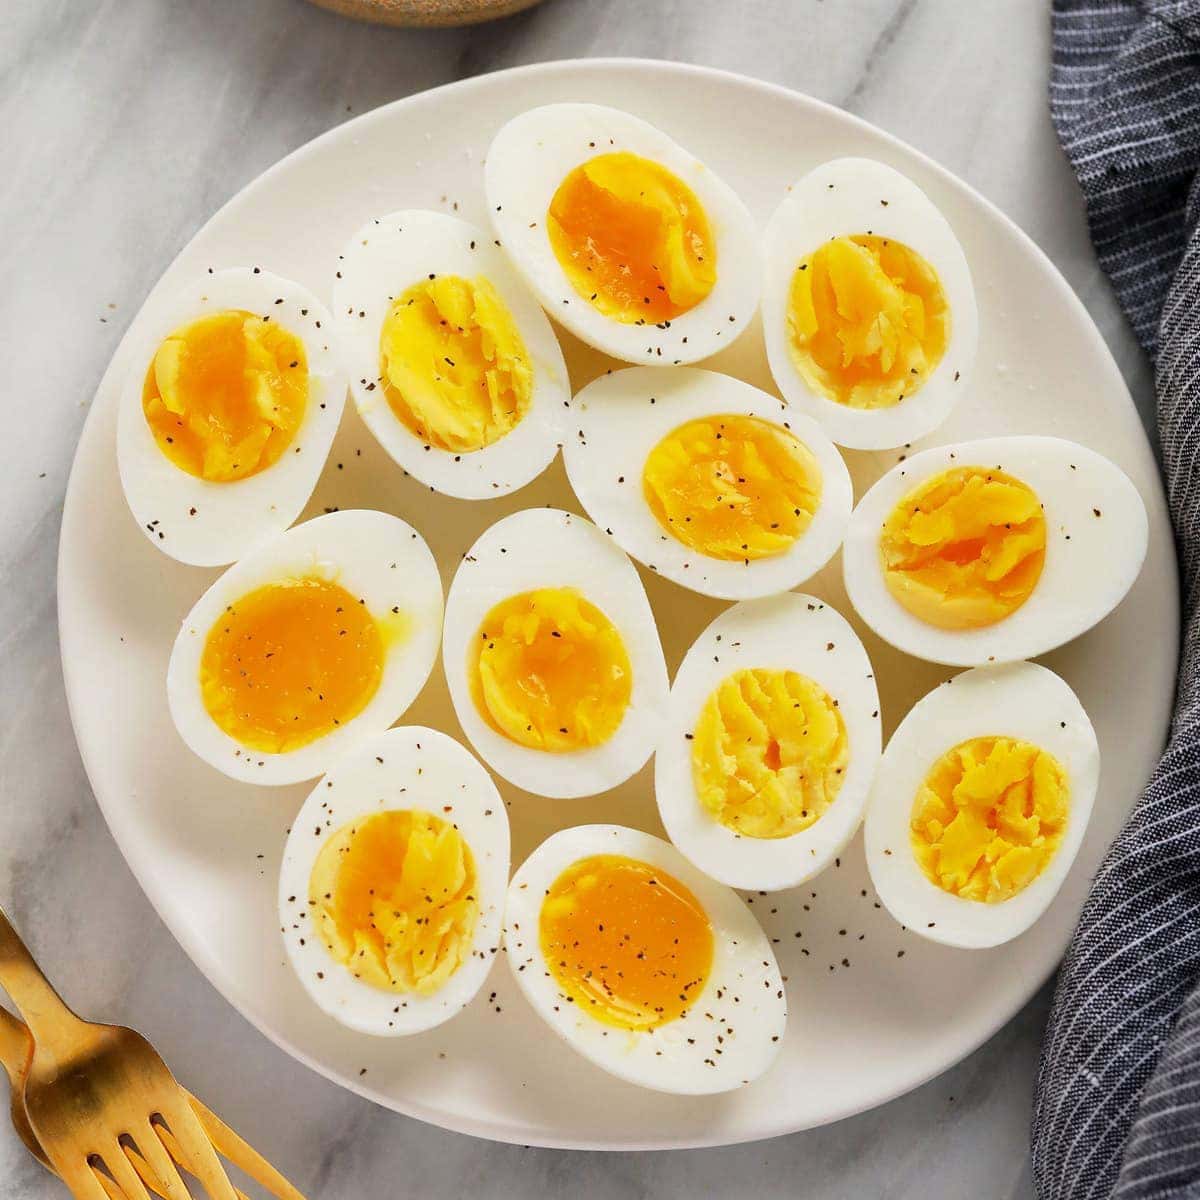 https://fitfoodiefinds.com/wp-content/uploads/2021/01/hard-boiled-eggs-3sq.jpg